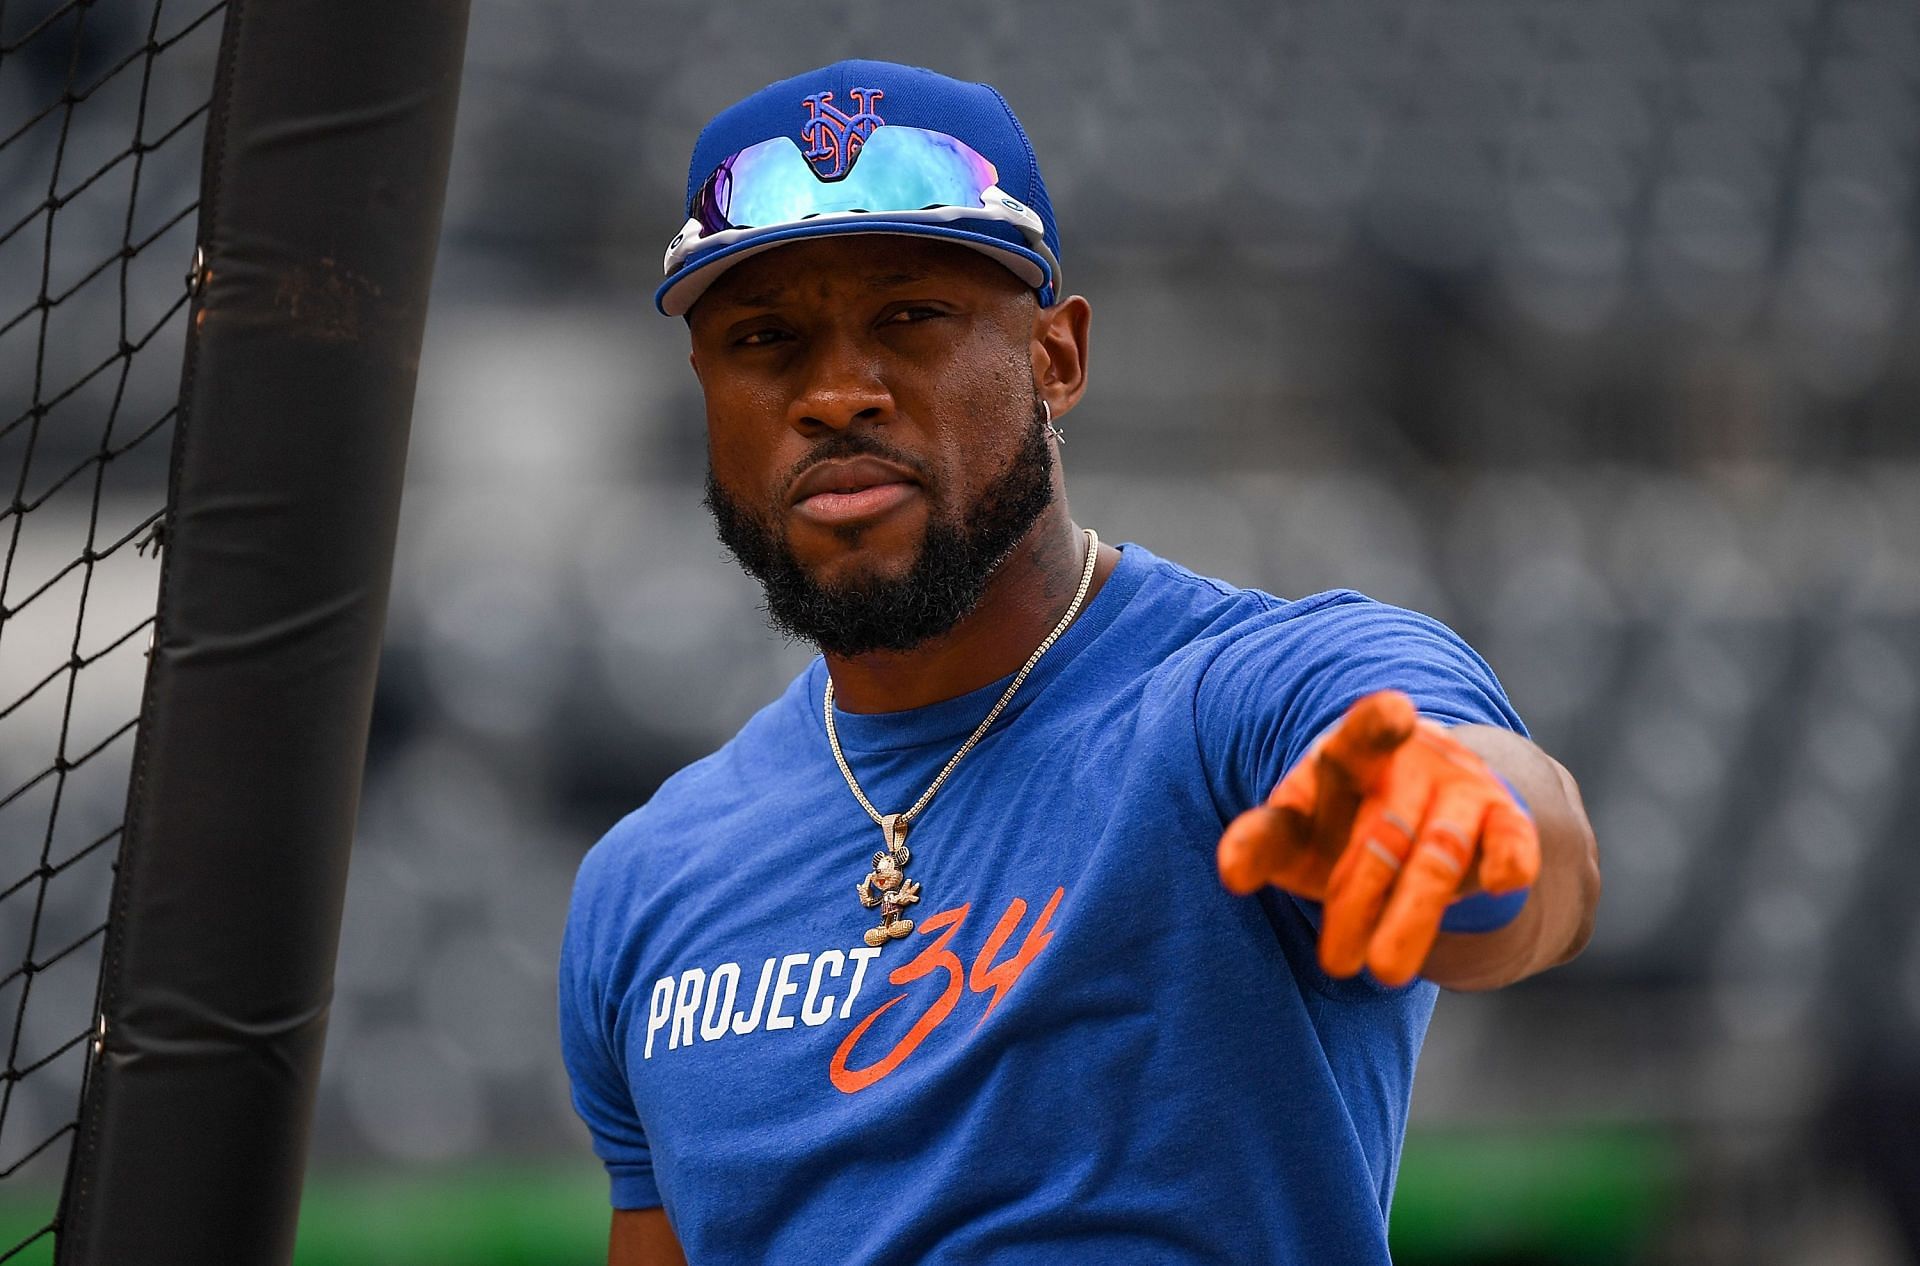 Starling Marte gets concerning injury update from Buck Showalter